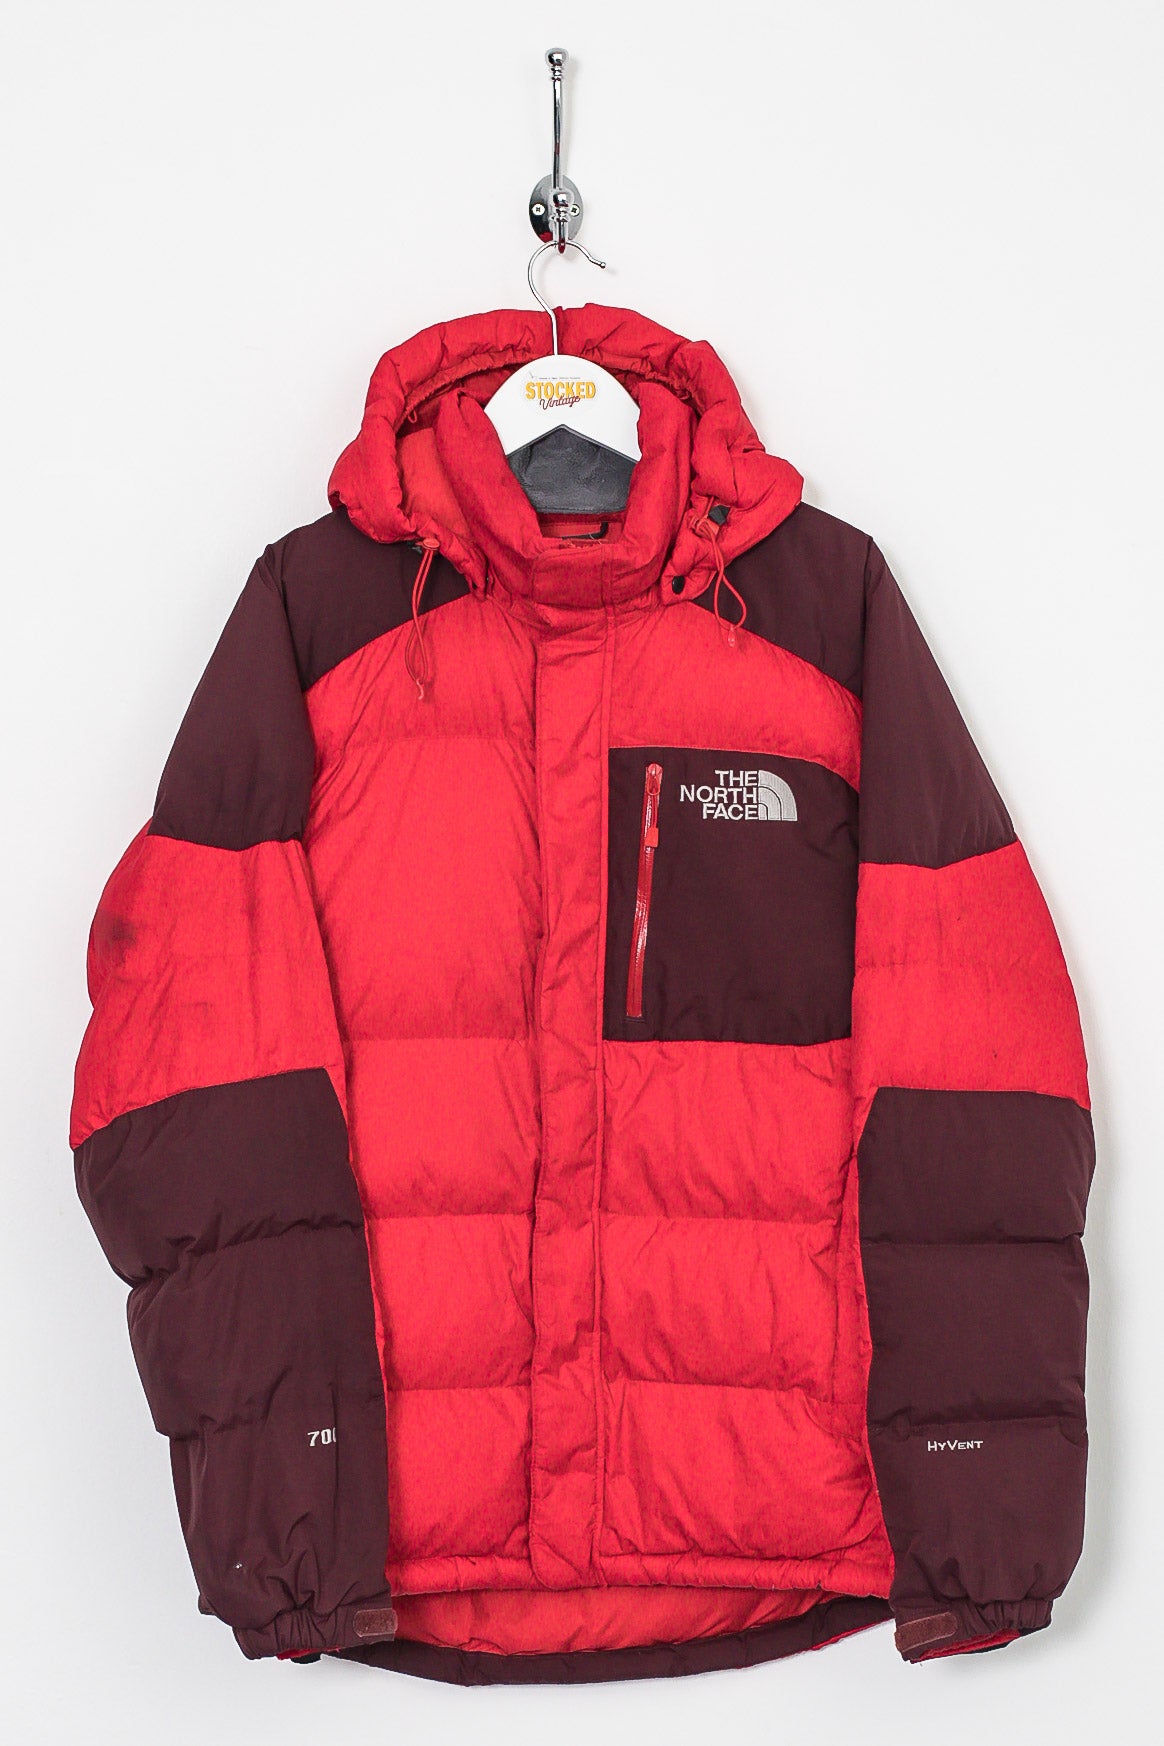 THE NORTH FACE 700fil HYVENT DOWN JACKET